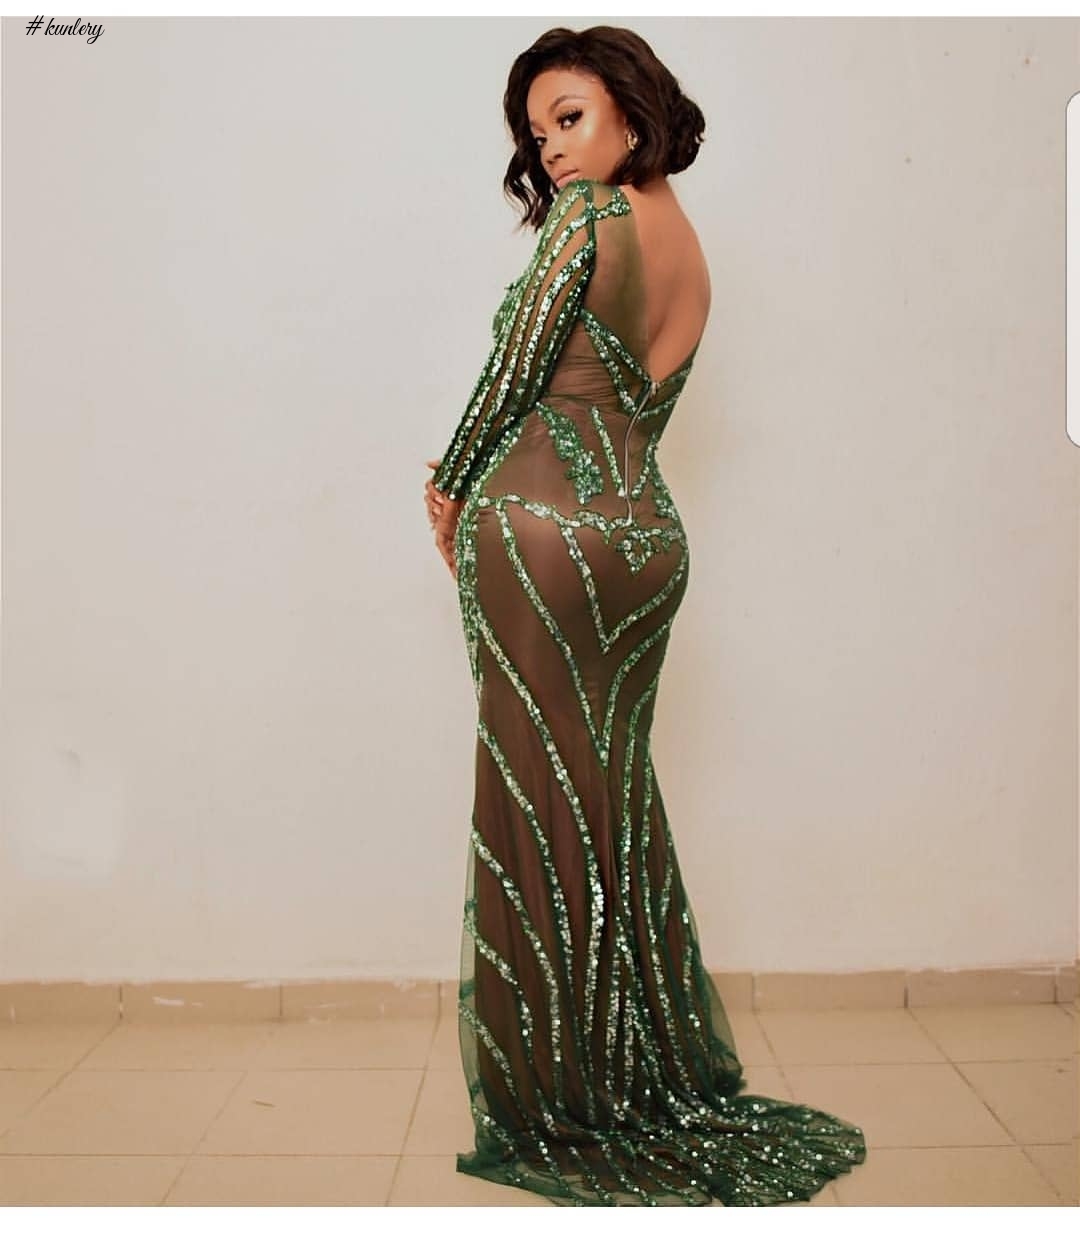 Toke Makinwa Co-Hosted MBGN 2018 in 3 Fab Outfits And We Have The Scoop!